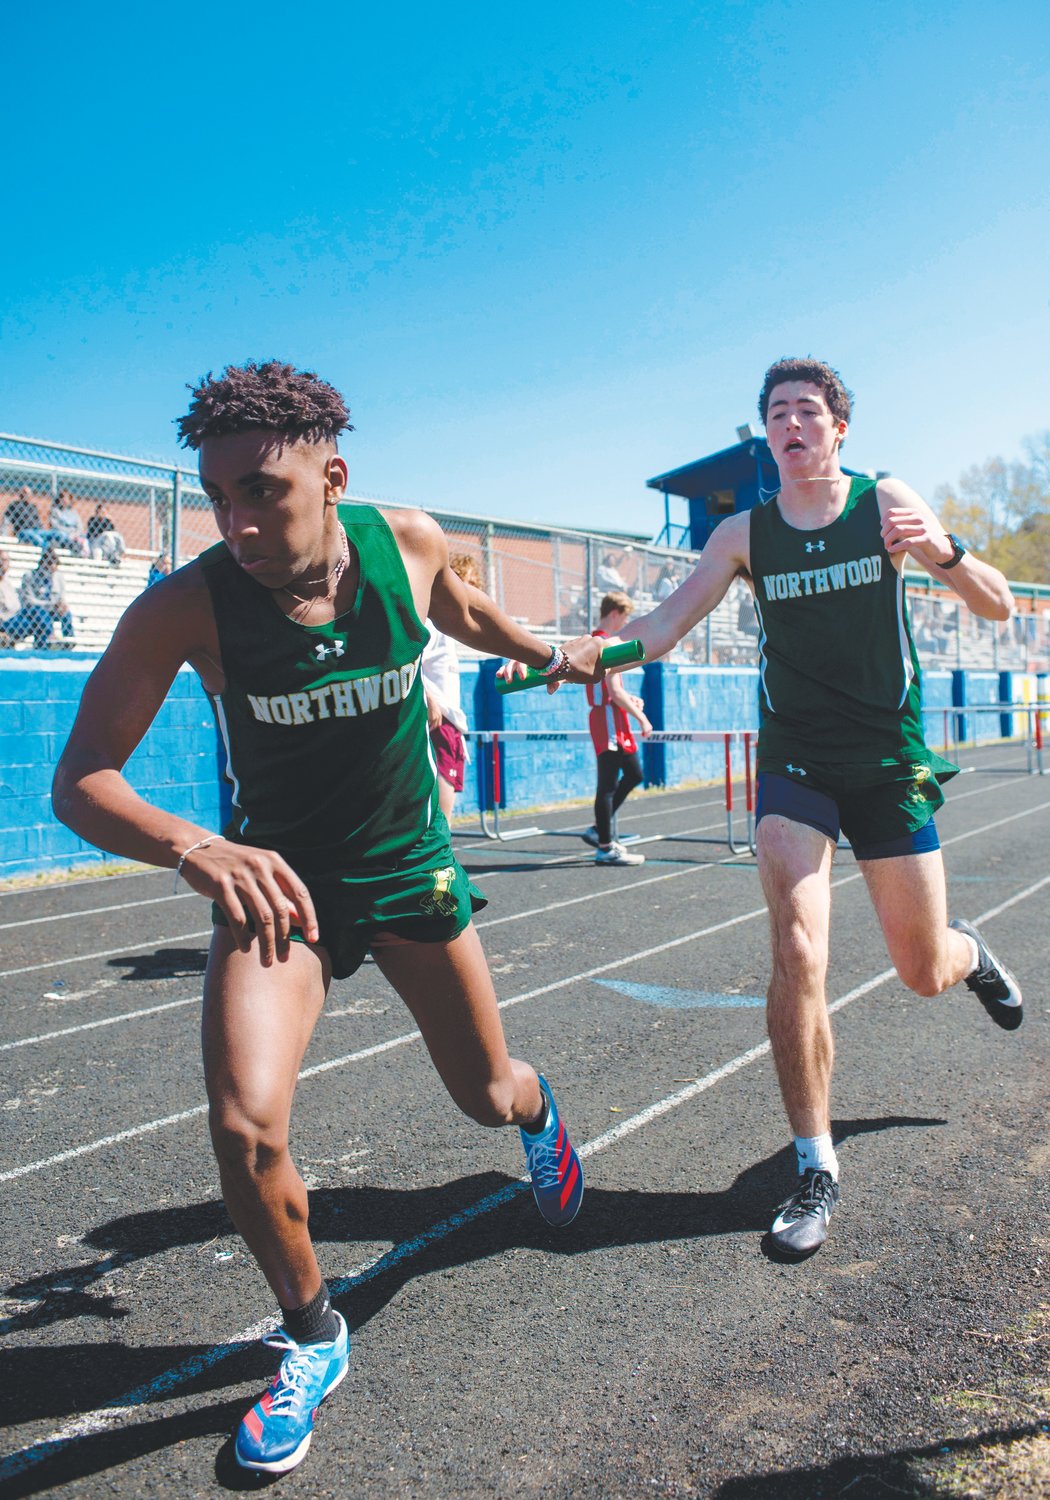 Northwood sophomore Noah Nielson (back) passes the baton to junior Christian Glick during a relay event at the Chatham County Invitational on Saturday.